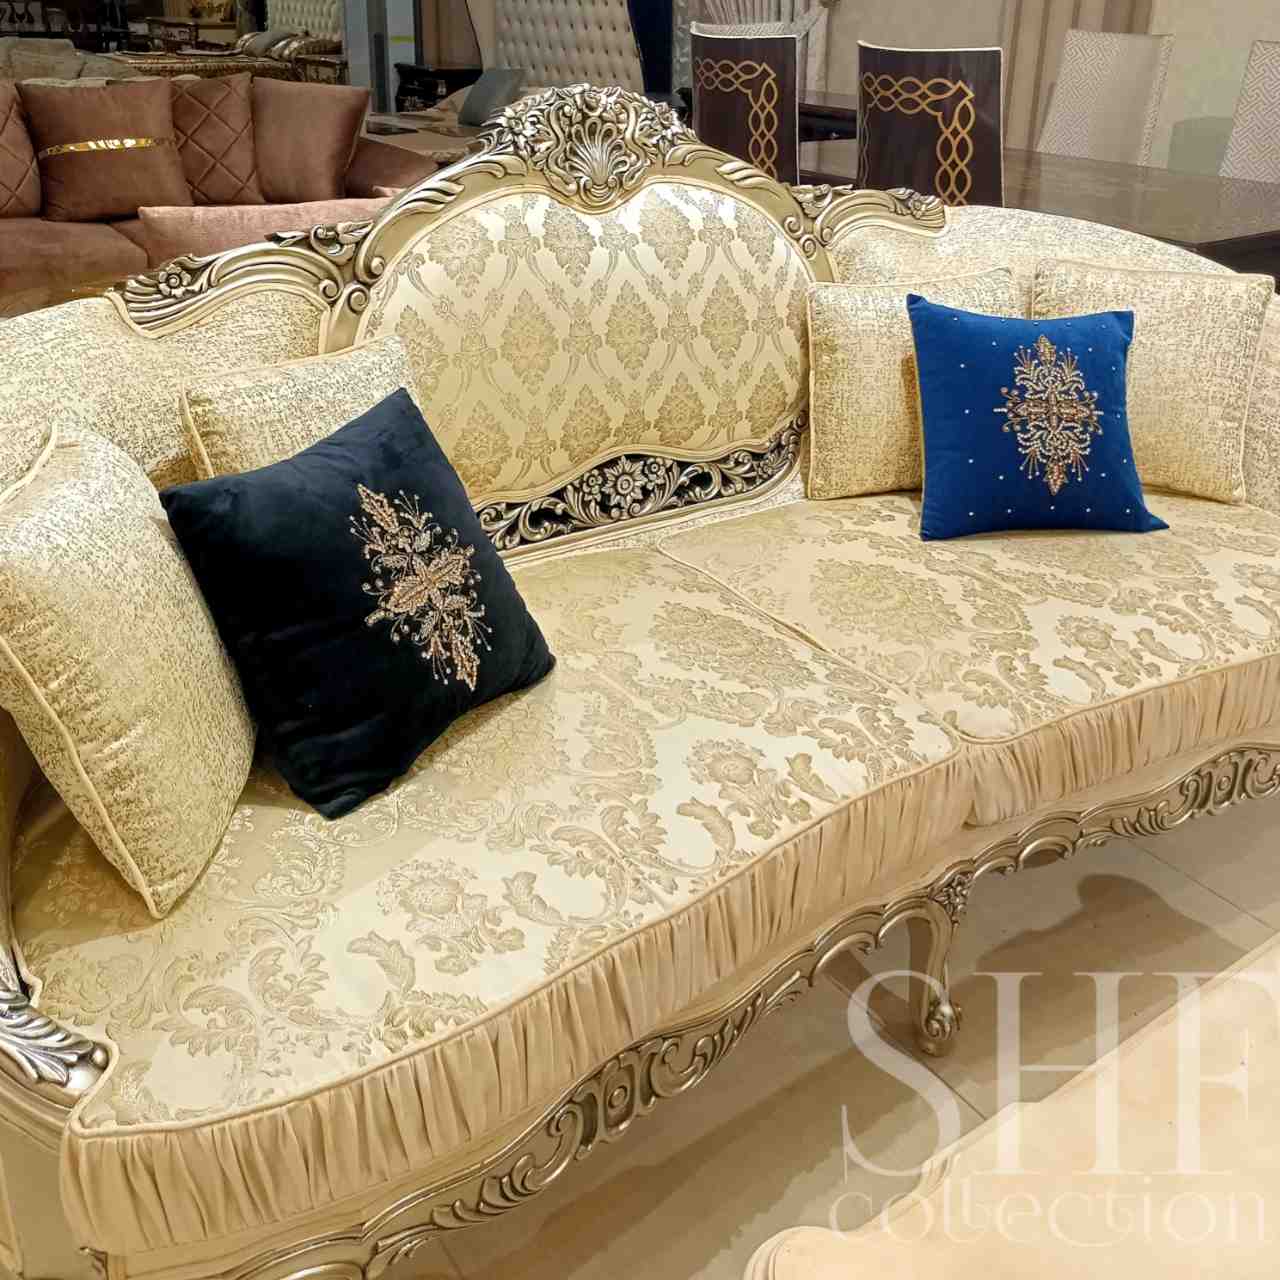 Sofas Designs Pictures | Baci Living Room